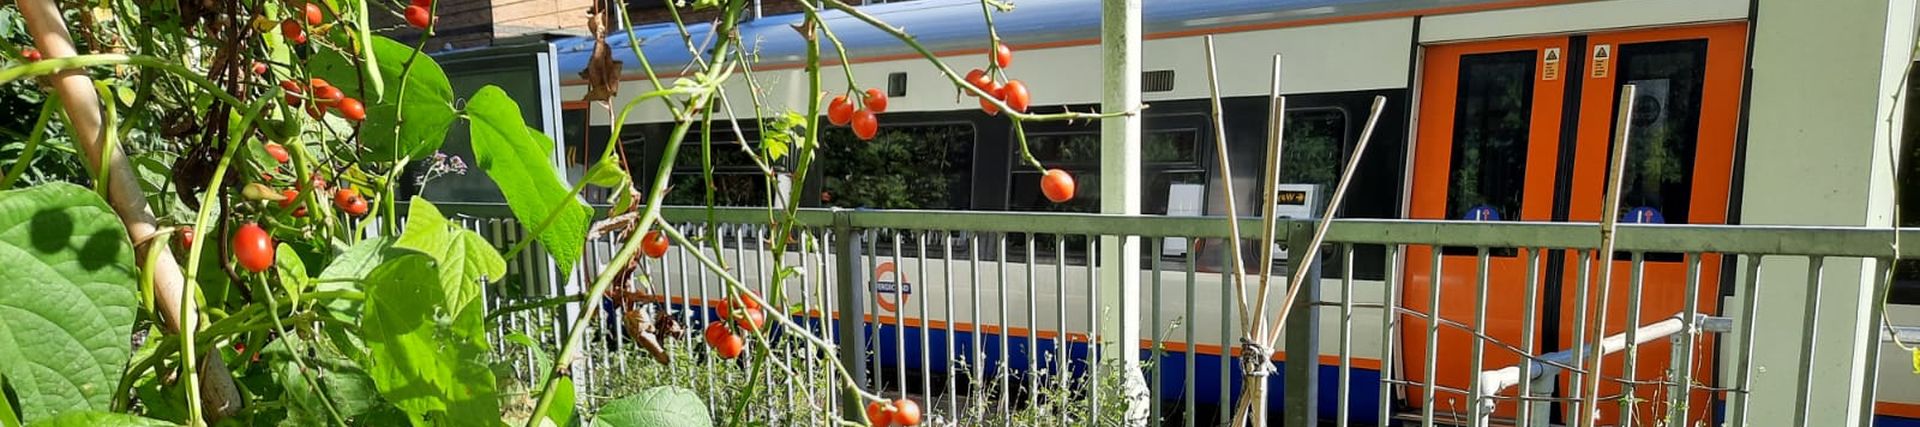 An allotment on the side of a London Overground's platform